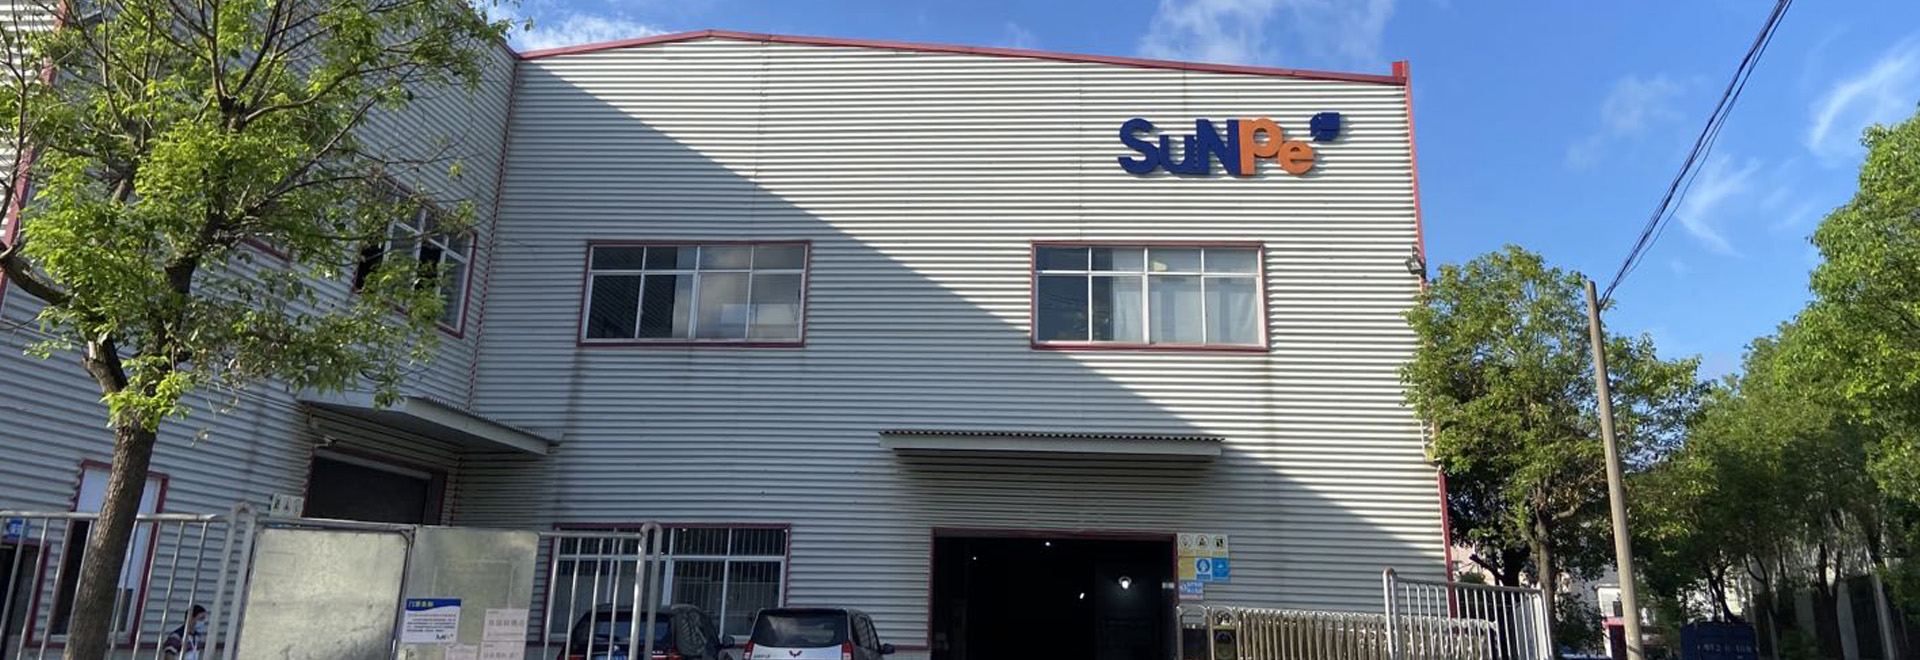 4 Standard Factories to Support SuNPe's Business